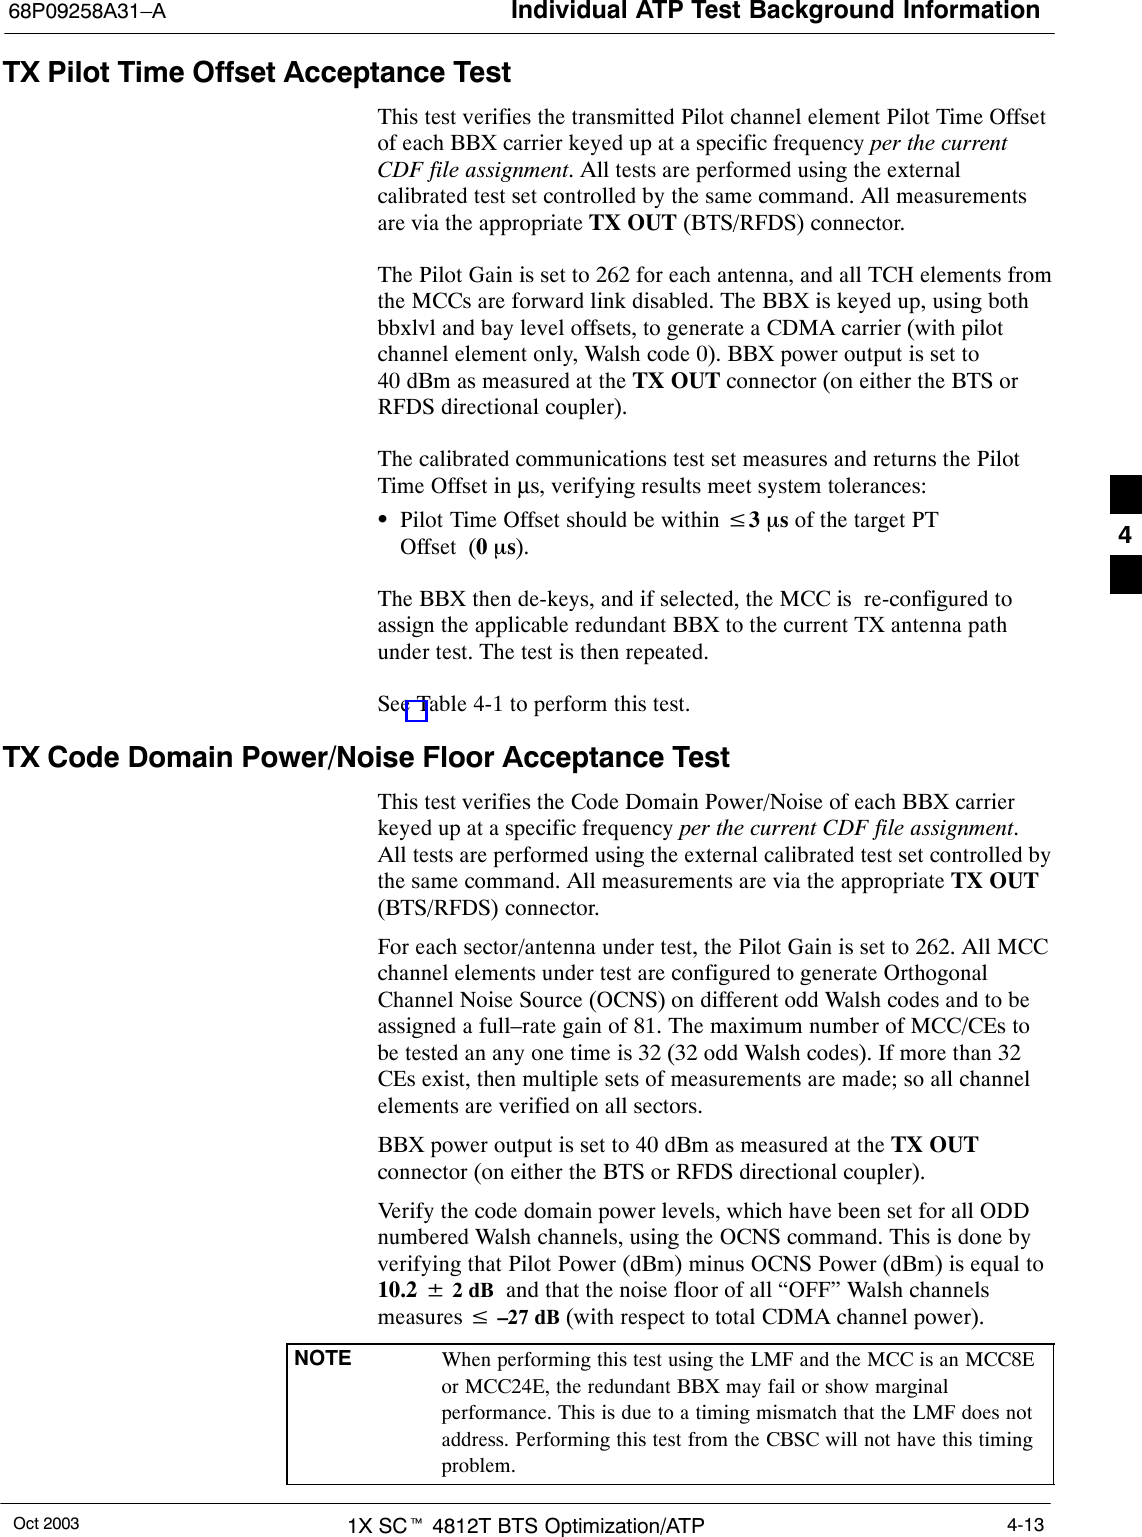 Individual ATP Test Background Information68P09258A31–AOct 2003 1X SCt 4812T BTS Optimization/ATP 4-13TX Pilot Time Offset Acceptance TestThis test verifies the transmitted Pilot channel element Pilot Time Offsetof each BBX carrier keyed up at a specific frequency per the currentCDF file assignment. All tests are performed using the externalcalibrated test set controlled by the same command. All measurementsare via the appropriate TX OUT (BTS/RFDS) connector.The Pilot Gain is set to 262 for each antenna, and all TCH elements fromthe MCCs are forward link disabled. The BBX is keyed up, using bothbbxlvl and bay level offsets, to generate a CDMA carrier (with pilotchannel element only, Walsh code 0). BBX power output is set to40 dBm as measured at the TX OUT connector (on either the BTS orRFDS directional coupler).The calibrated communications test set measures and returns the PilotTime Offset in µs, verifying results meet system tolerances:SPilot Time Offset should be within v3 ms of the target PTOffset (0ms).The BBX then de-keys, and if selected, the MCC is  re-configured toassign the applicable redundant BBX to the current TX antenna pathunder test. The test is then repeated.See Table 4-1 to perform this test.TX Code Domain Power/Noise Floor Acceptance TestThis test verifies the Code Domain Power/Noise of each BBX carrierkeyed up at a specific frequency per the current CDF file assignment.All tests are performed using the external calibrated test set controlled bythe same command. All measurements are via the appropriate TX OUT(BTS/RFDS) connector.For each sector/antenna under test, the Pilot Gain is set to 262. All MCCchannel elements under test are configured to generate OrthogonalChannel Noise Source (OCNS) on different odd Walsh codes and to beassigned a full–rate gain of 81. The maximum number of MCC/CEs tobe tested an any one time is 32 (32 odd Walsh codes). If more than 32CEs exist, then multiple sets of measurements are made; so all channelelements are verified on all sectors.BBX power output is set to 40 dBm as measured at the TX OUTconnector (on either the BTS or RFDS directional coupler).Verify the code domain power levels, which have been set for all ODDnumbered Walsh channels, using the OCNS command. This is done byverifying that Pilot Power (dBm) minus OCNS Power (dBm) is equal to10.2 $ 2 dB  and that the noise floor of all “OFF” Walsh channelsmeasures v –27 dB (with respect to total CDMA channel power).NOTE When performing this test using the LMF and the MCC is an MCC8Eor MCC24E, the redundant BBX may fail or show marginalperformance. This is due to a timing mismatch that the LMF does notaddress. Performing this test from the CBSC will not have this timingproblem.4